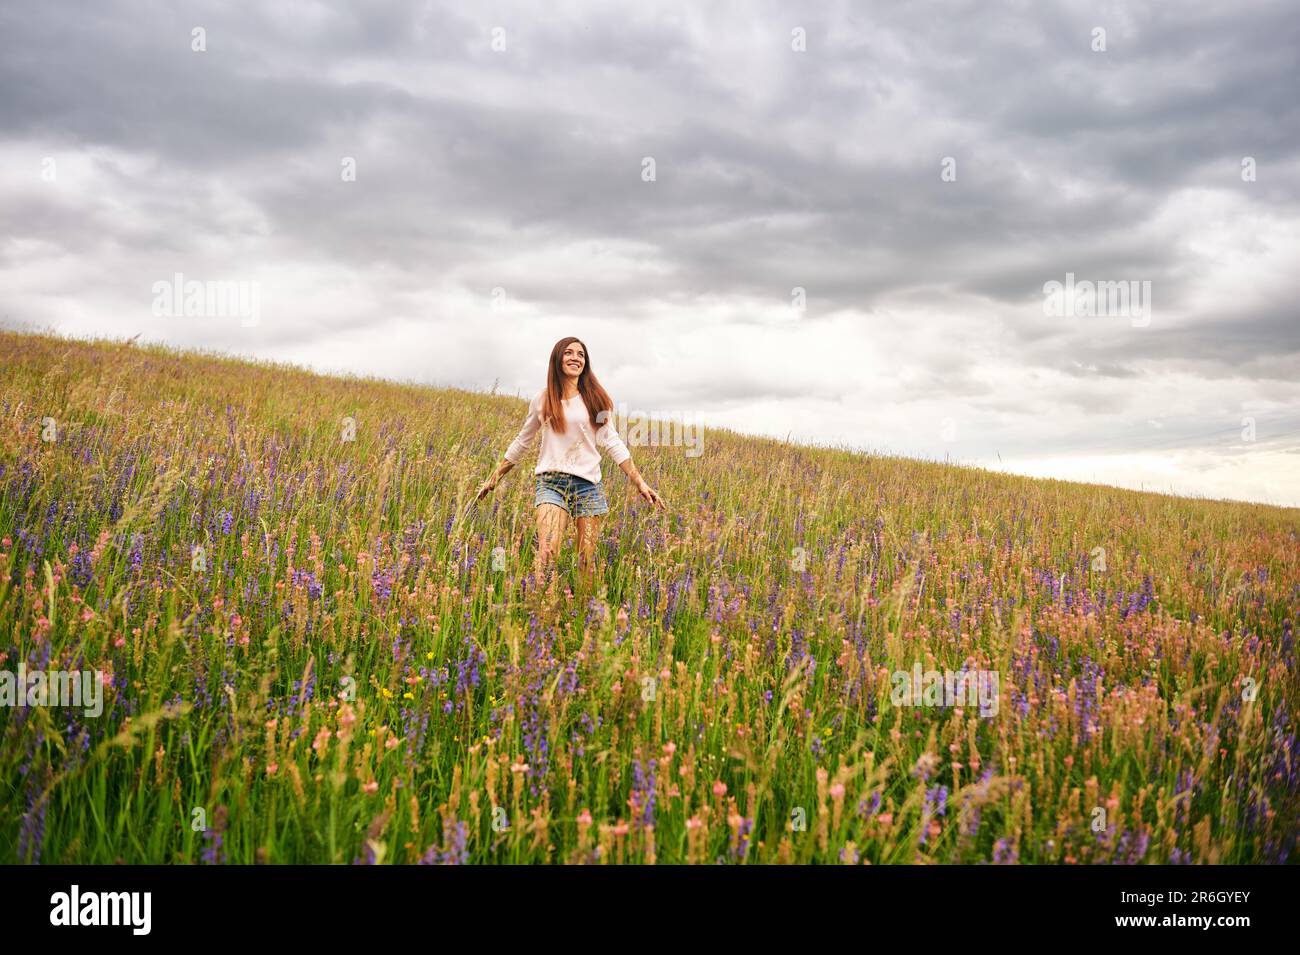 Young beautiful woman hiking in field with wildflowers Stock Photo